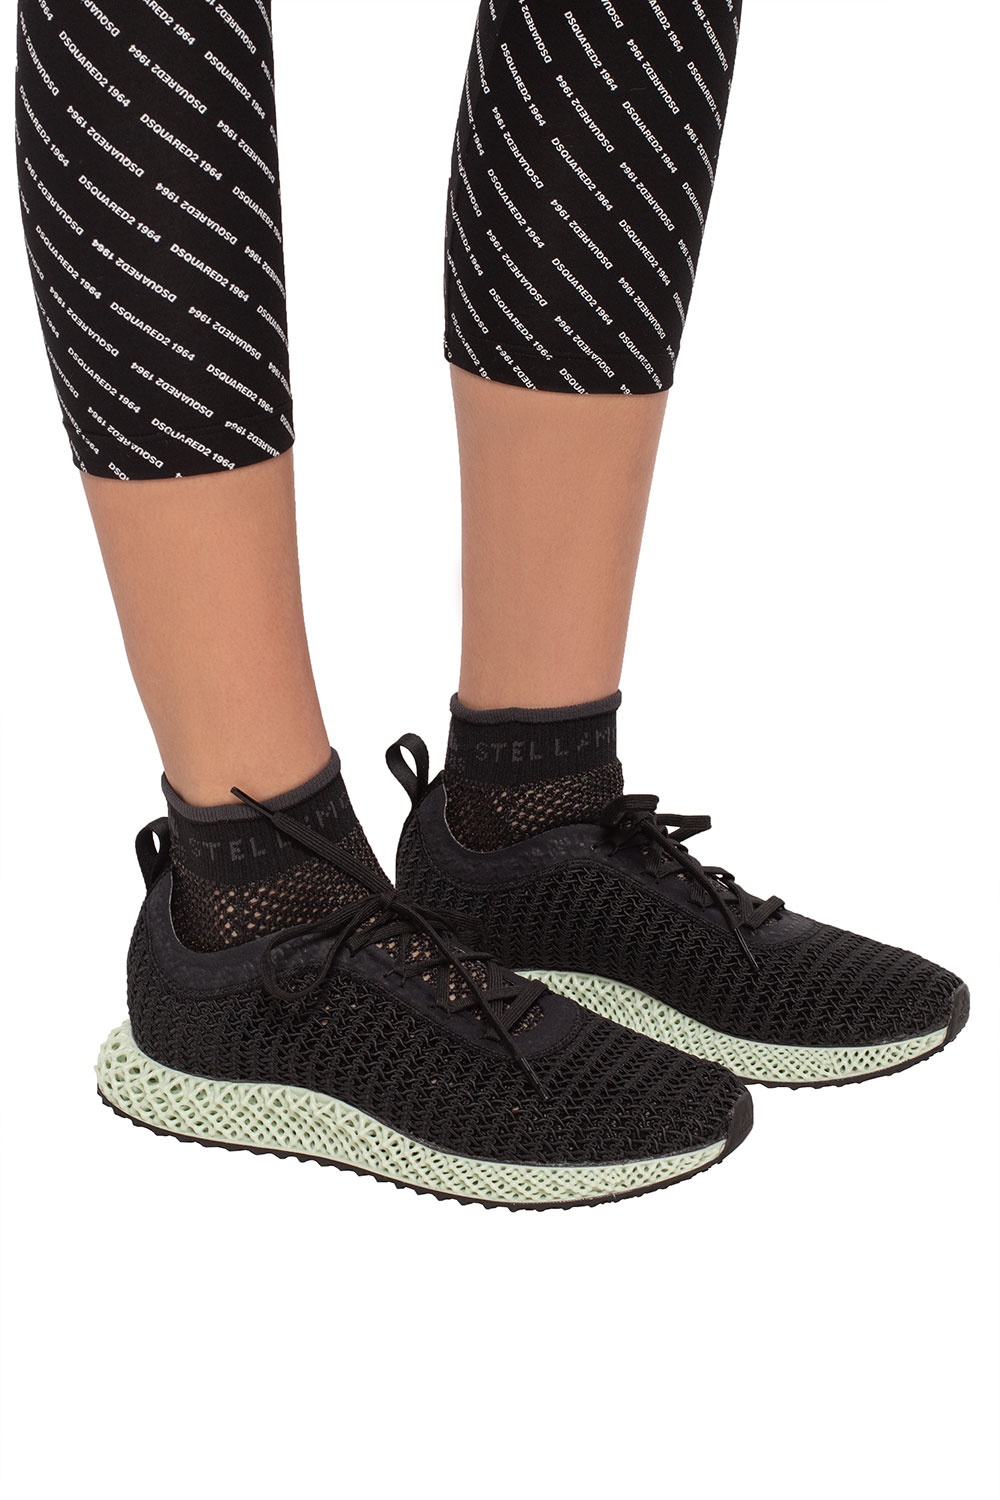 ADIDAS by Stella McCartney 'Alphaedge 4D' sneakers | Women's Shoes